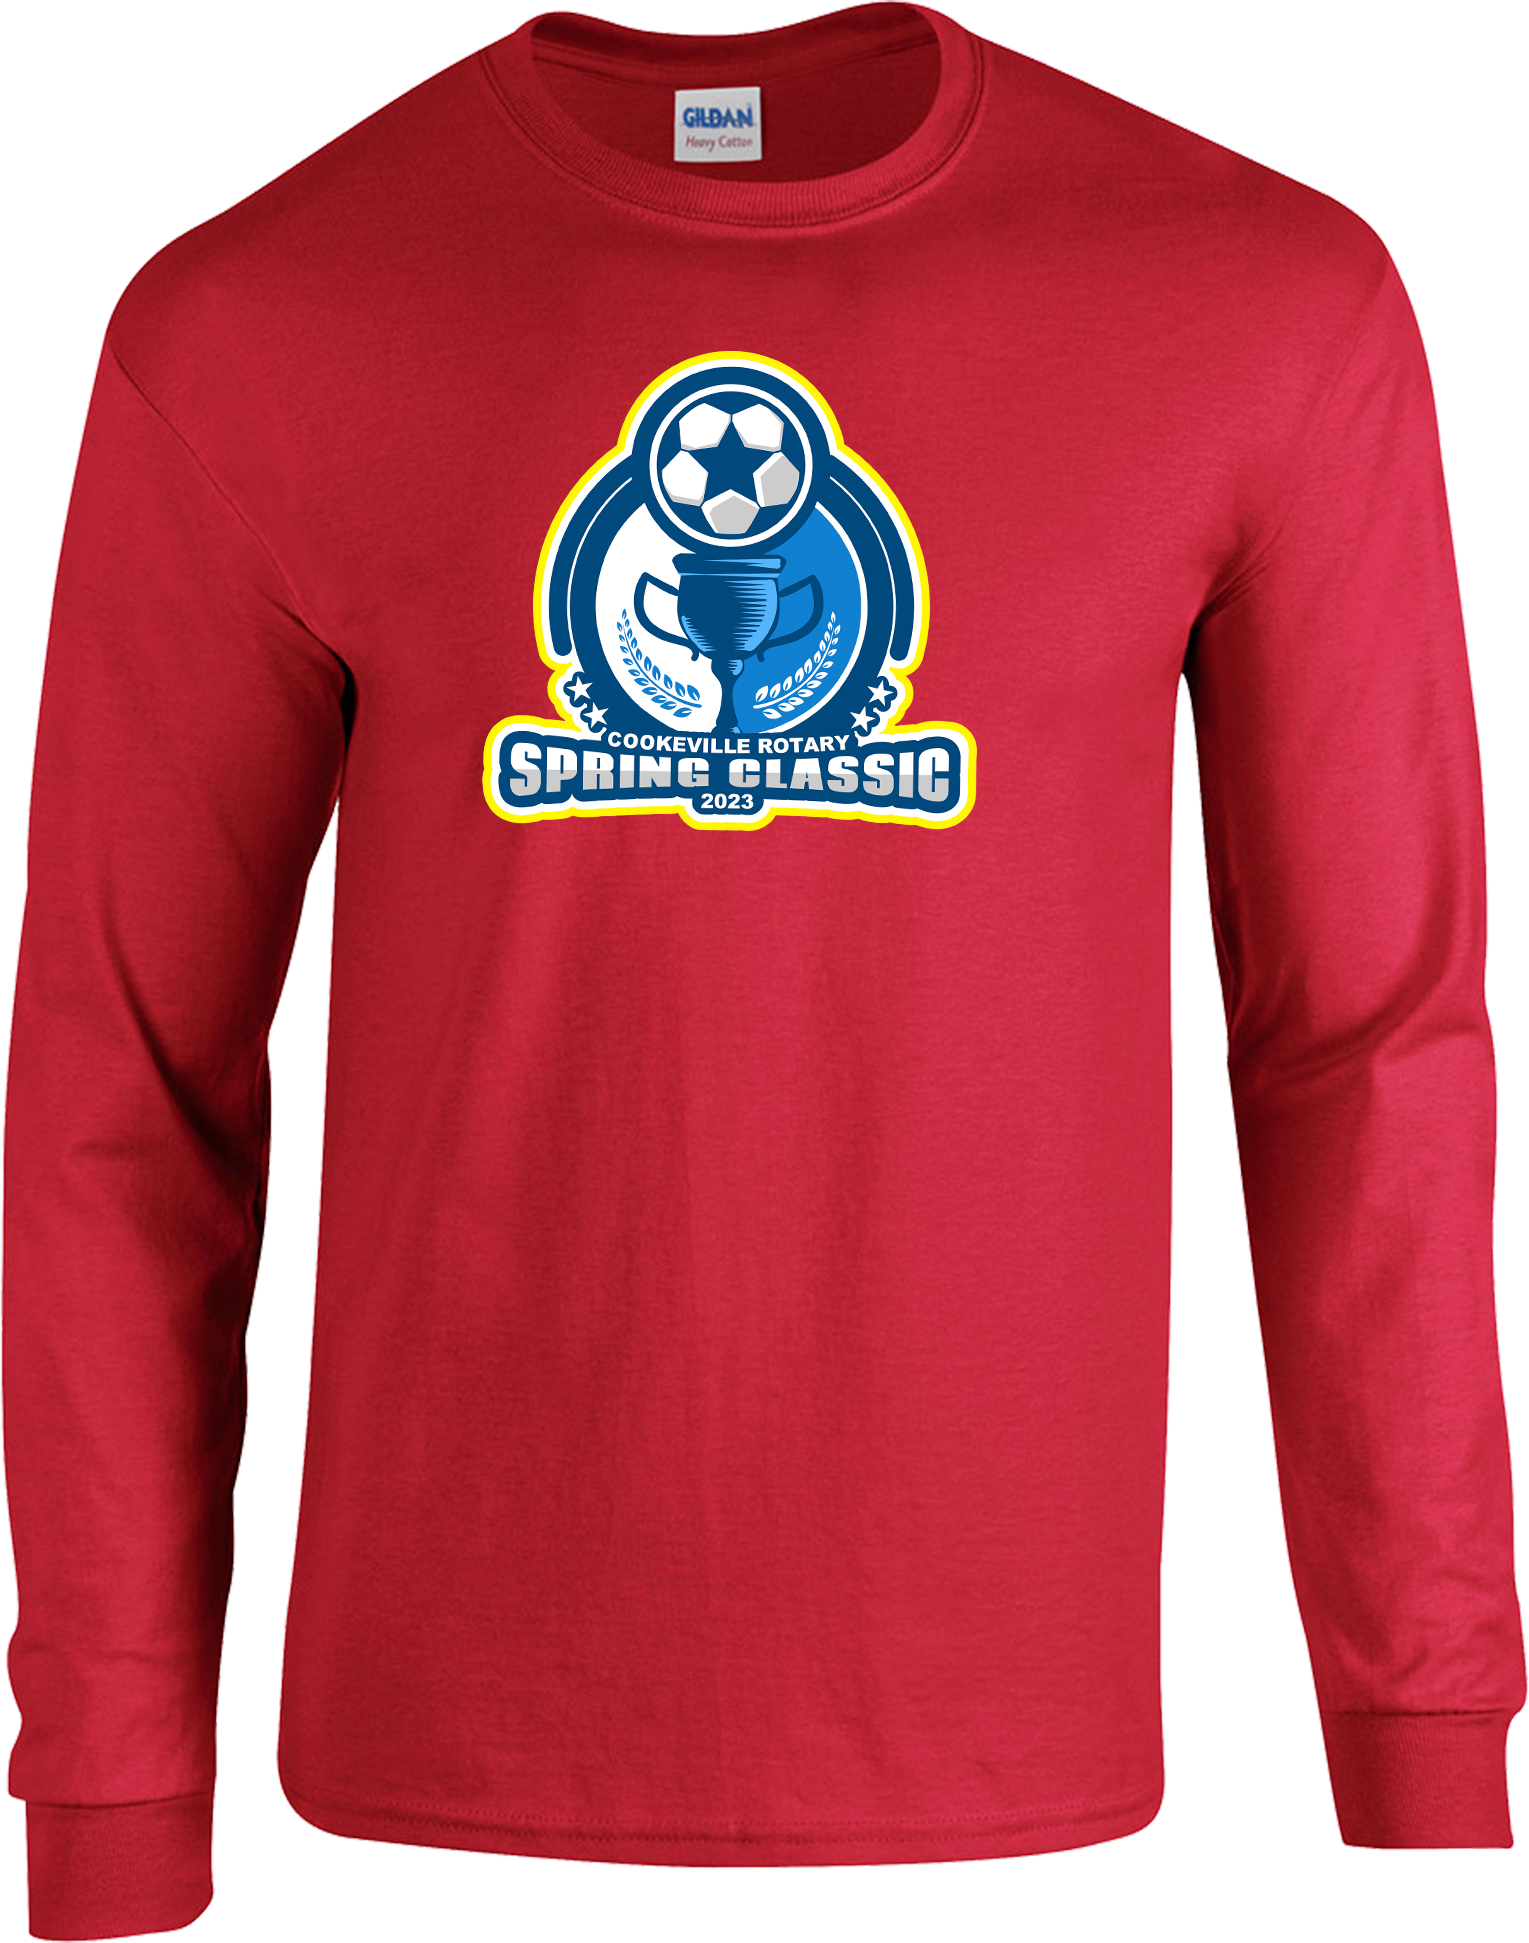 LONG SLEEVES - 2023 Cookesville Rotary Soccer Classic